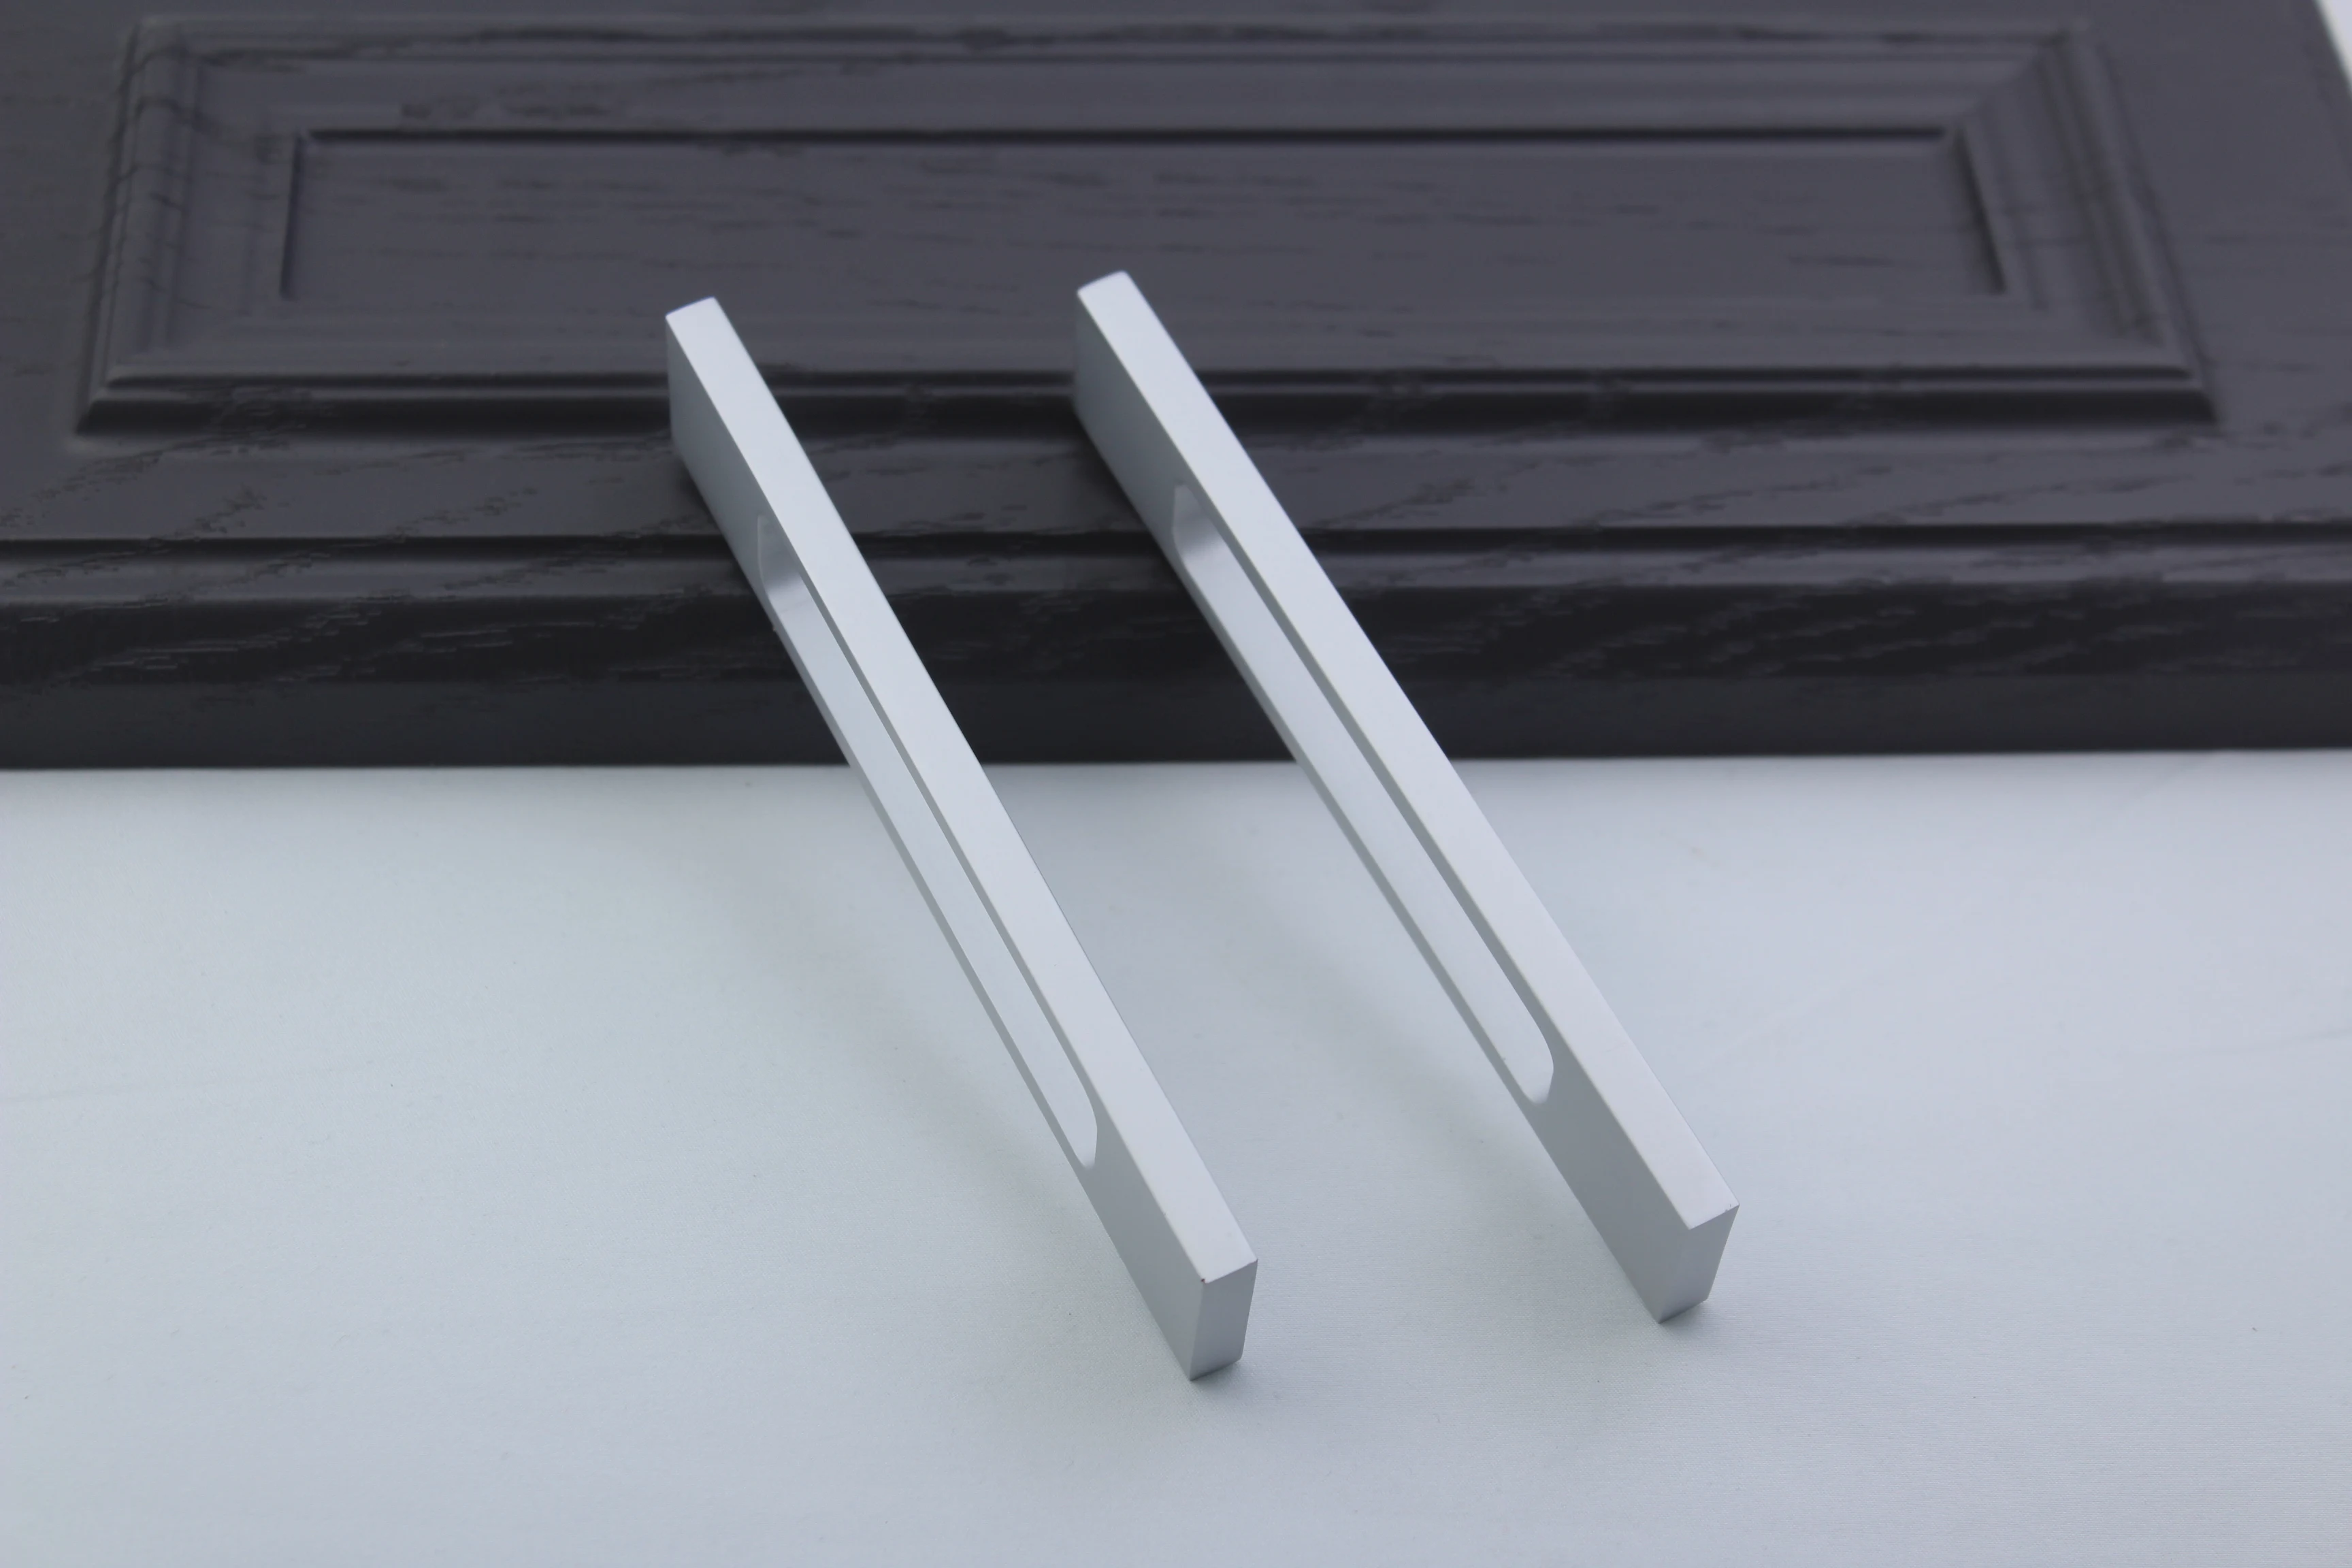 High quality aluminum alloy pull and push kitchen cabinet handles